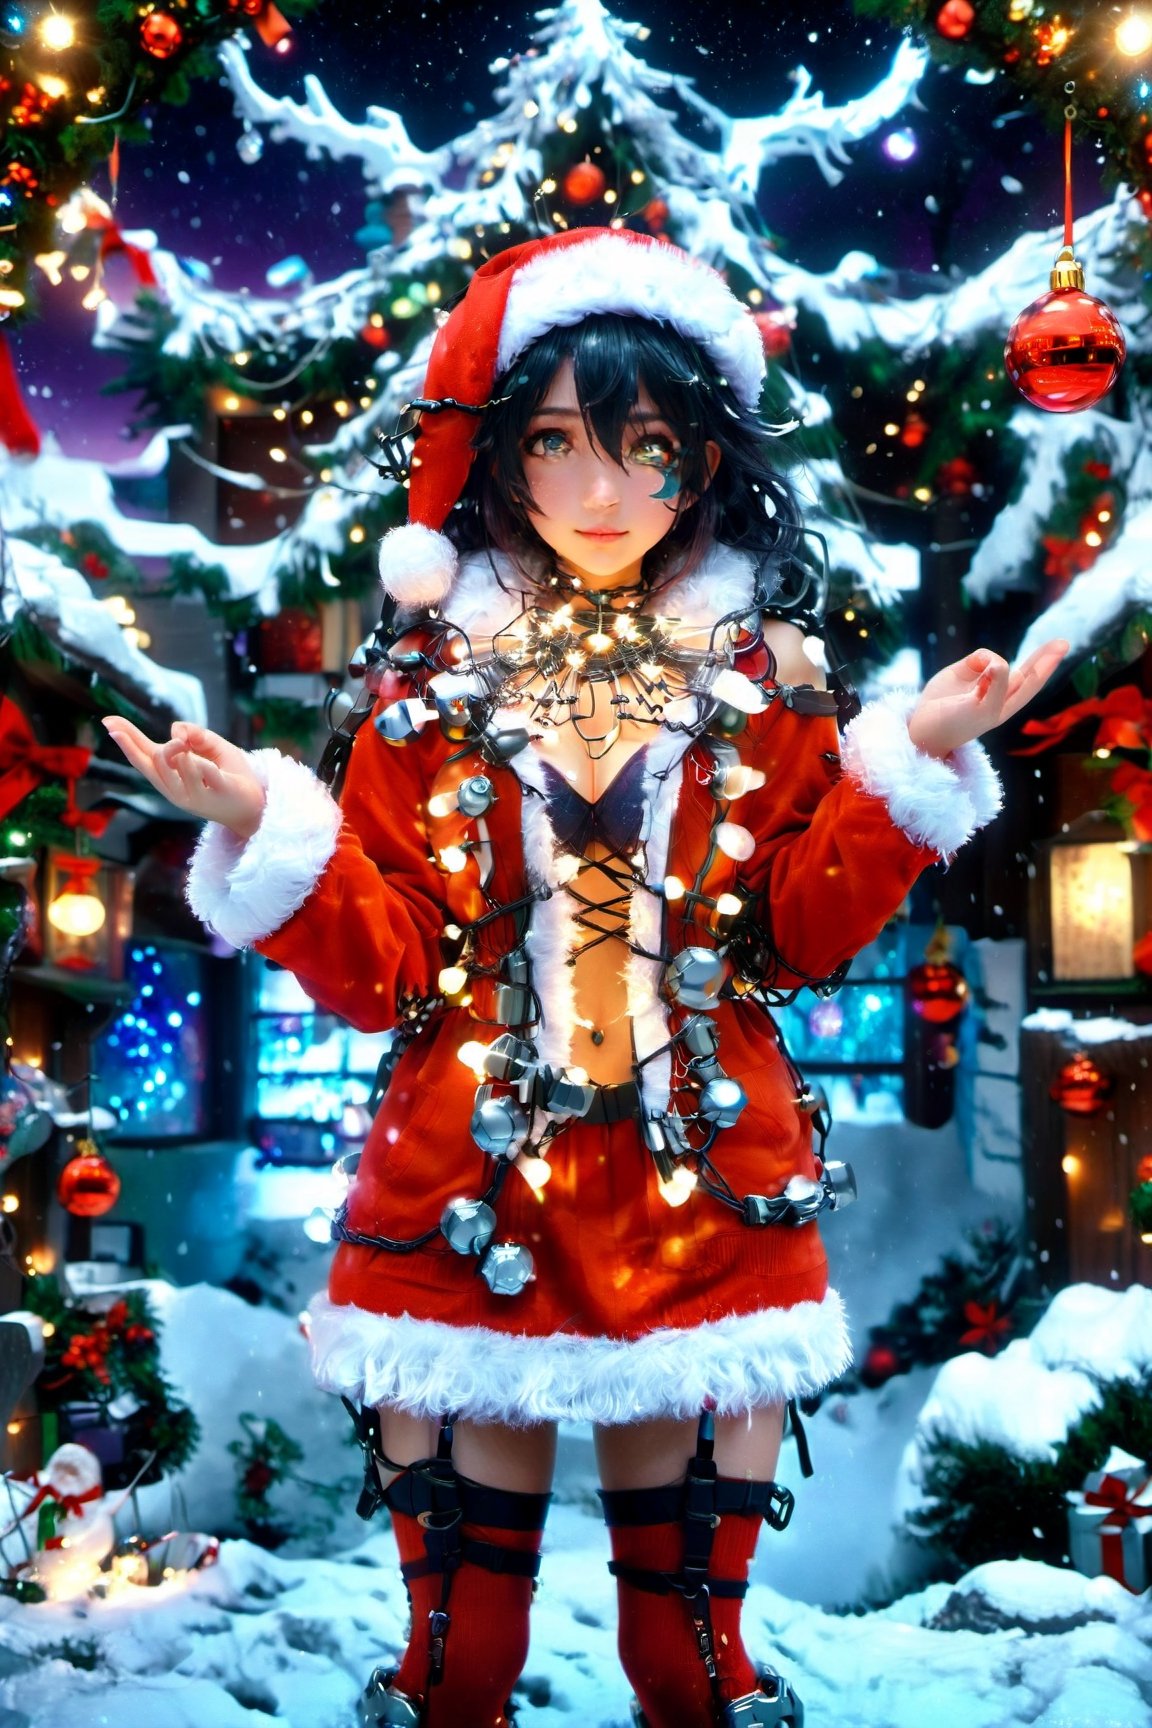 photograph, full body, wide shot, she is feeling lustful, she has (Natural Bio Mechanical arms and large legs:1.55) , anime art stylized by Edogawa Ranpo, mundane, (Cyborg 46 Santa girl:1.3) casting a Frost magic spell, feeling grateful, in christmas themed, her christmas themed also has a coat, Casting magic pose, Wrinkles, Stimulating forest, at Twilight, Kodak Ektachrome E100, 35mm, trending on CGSociety, detailed mystical face, detailed beautiful eyes, detailed eye pupils, complex electric christmas background, christmas